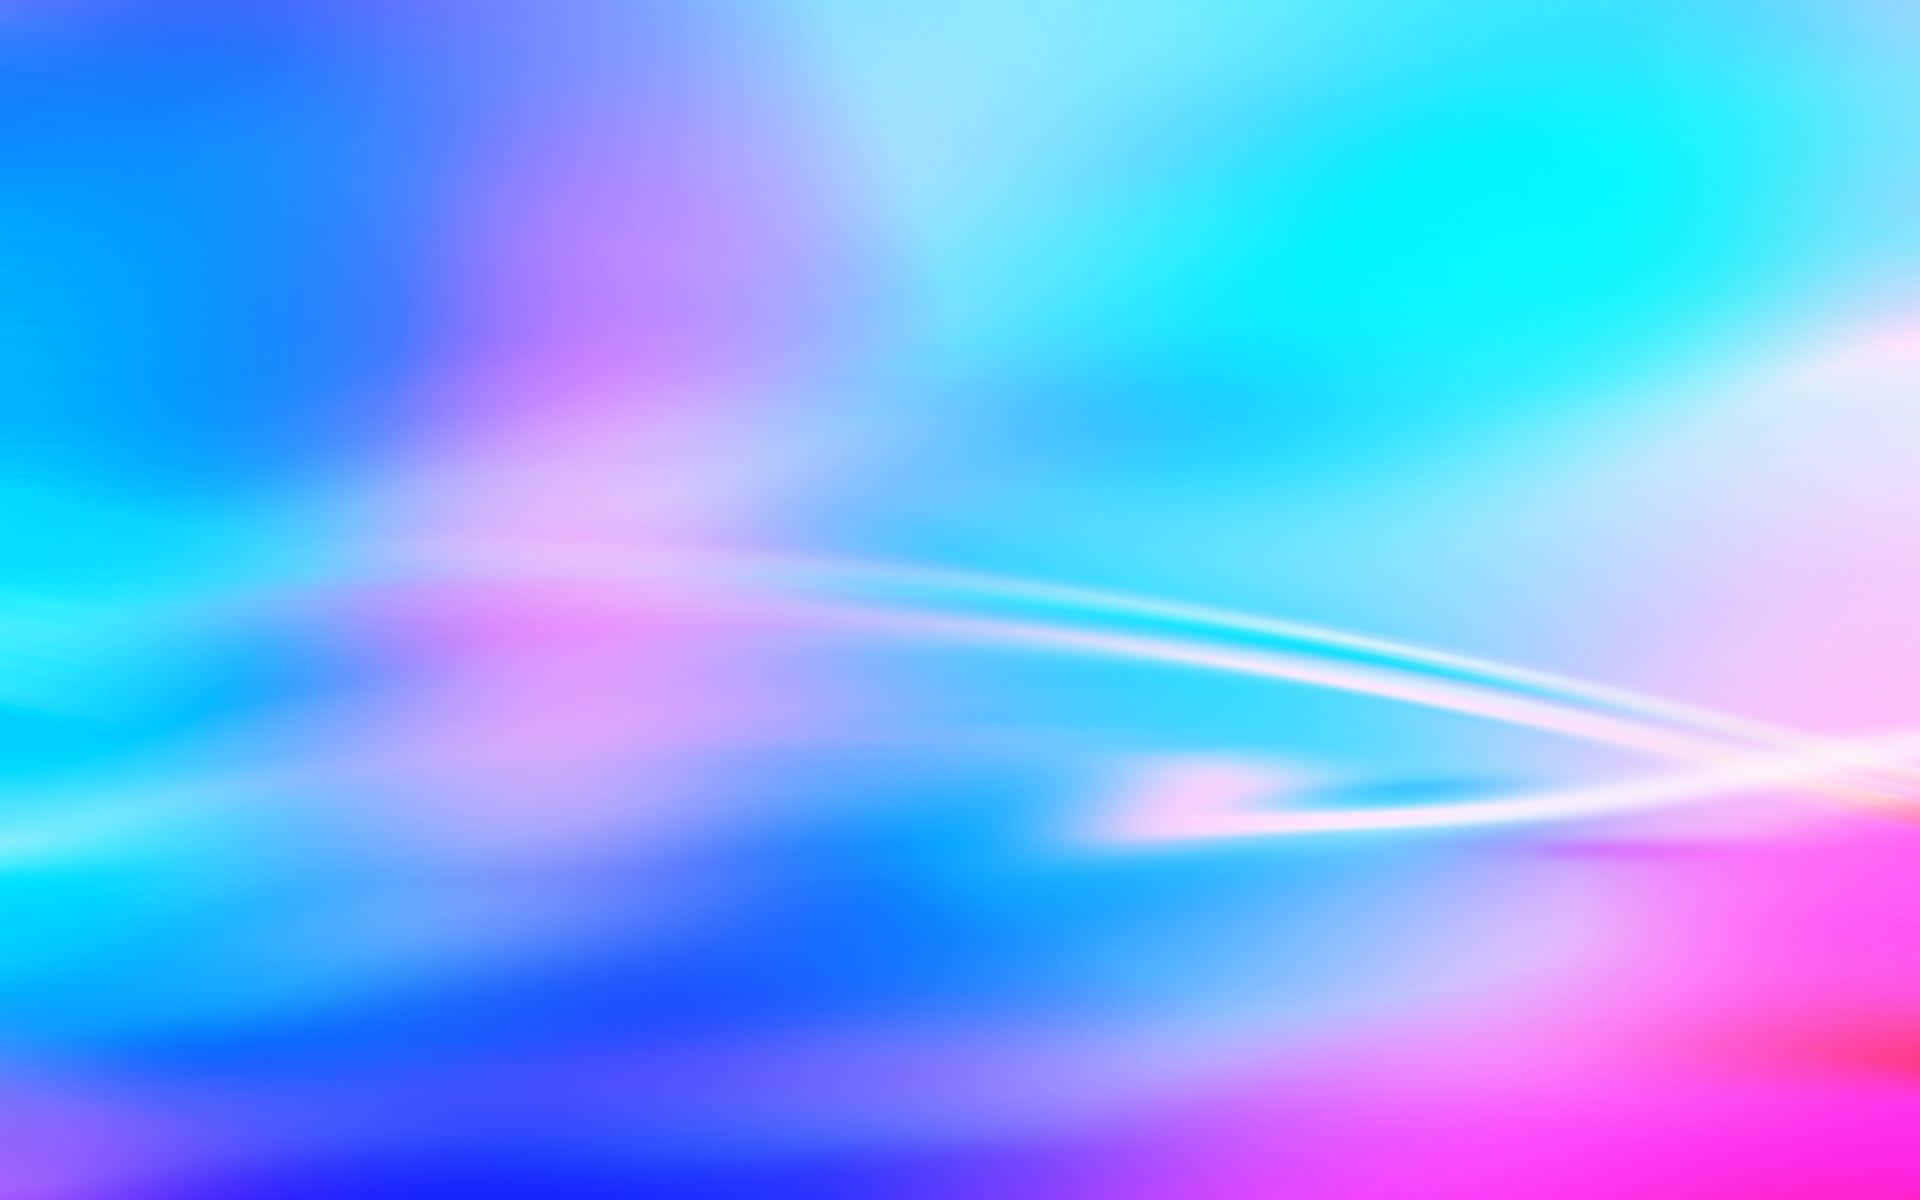 Delightful Pink and Blue Gradient Wallpaper